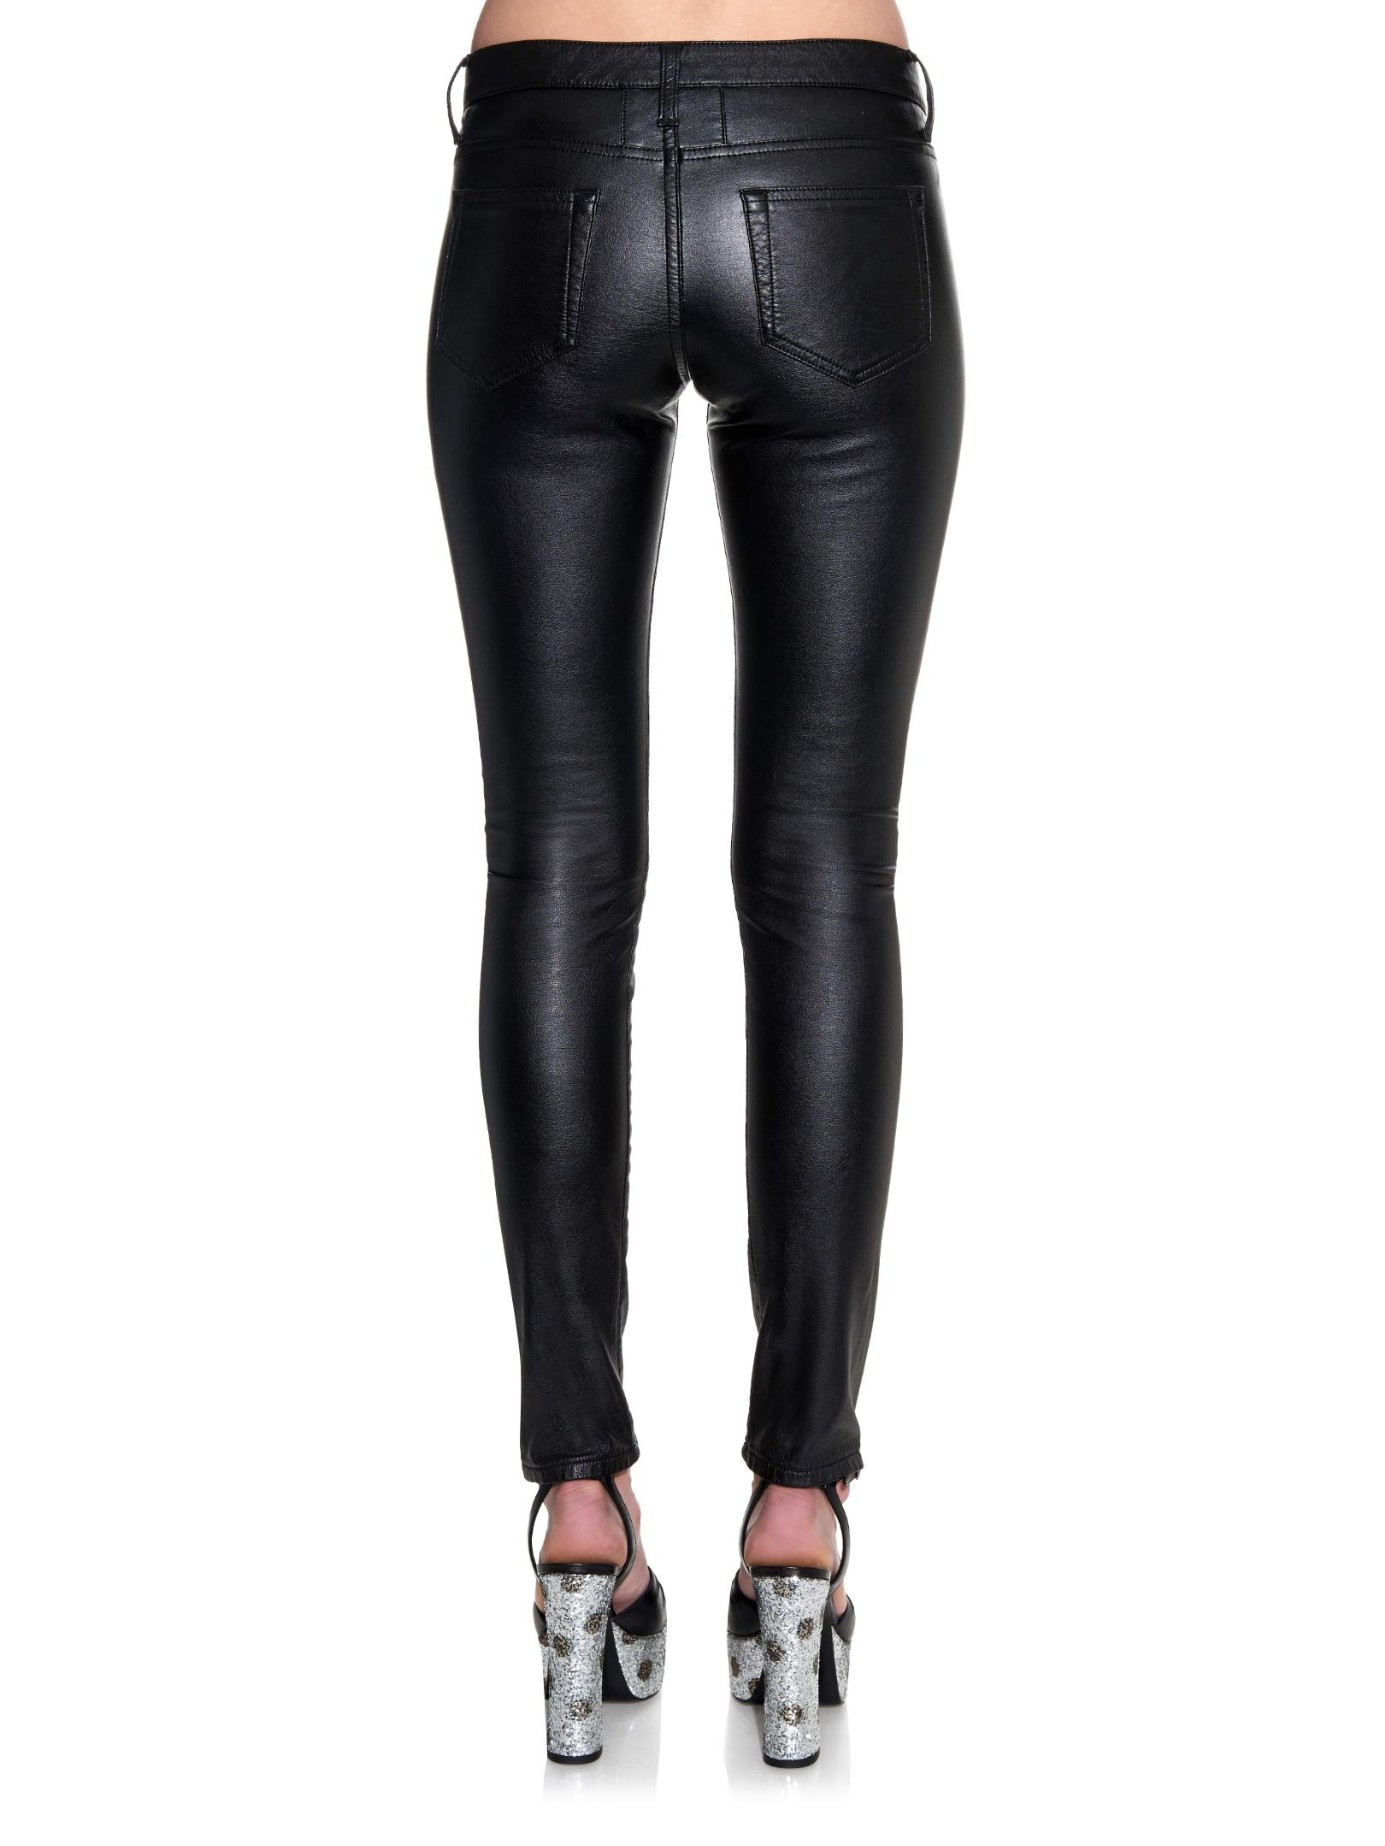 Saint Laurent Low-Rise Skinny Faux-Leather Trousers in Black - Lyst